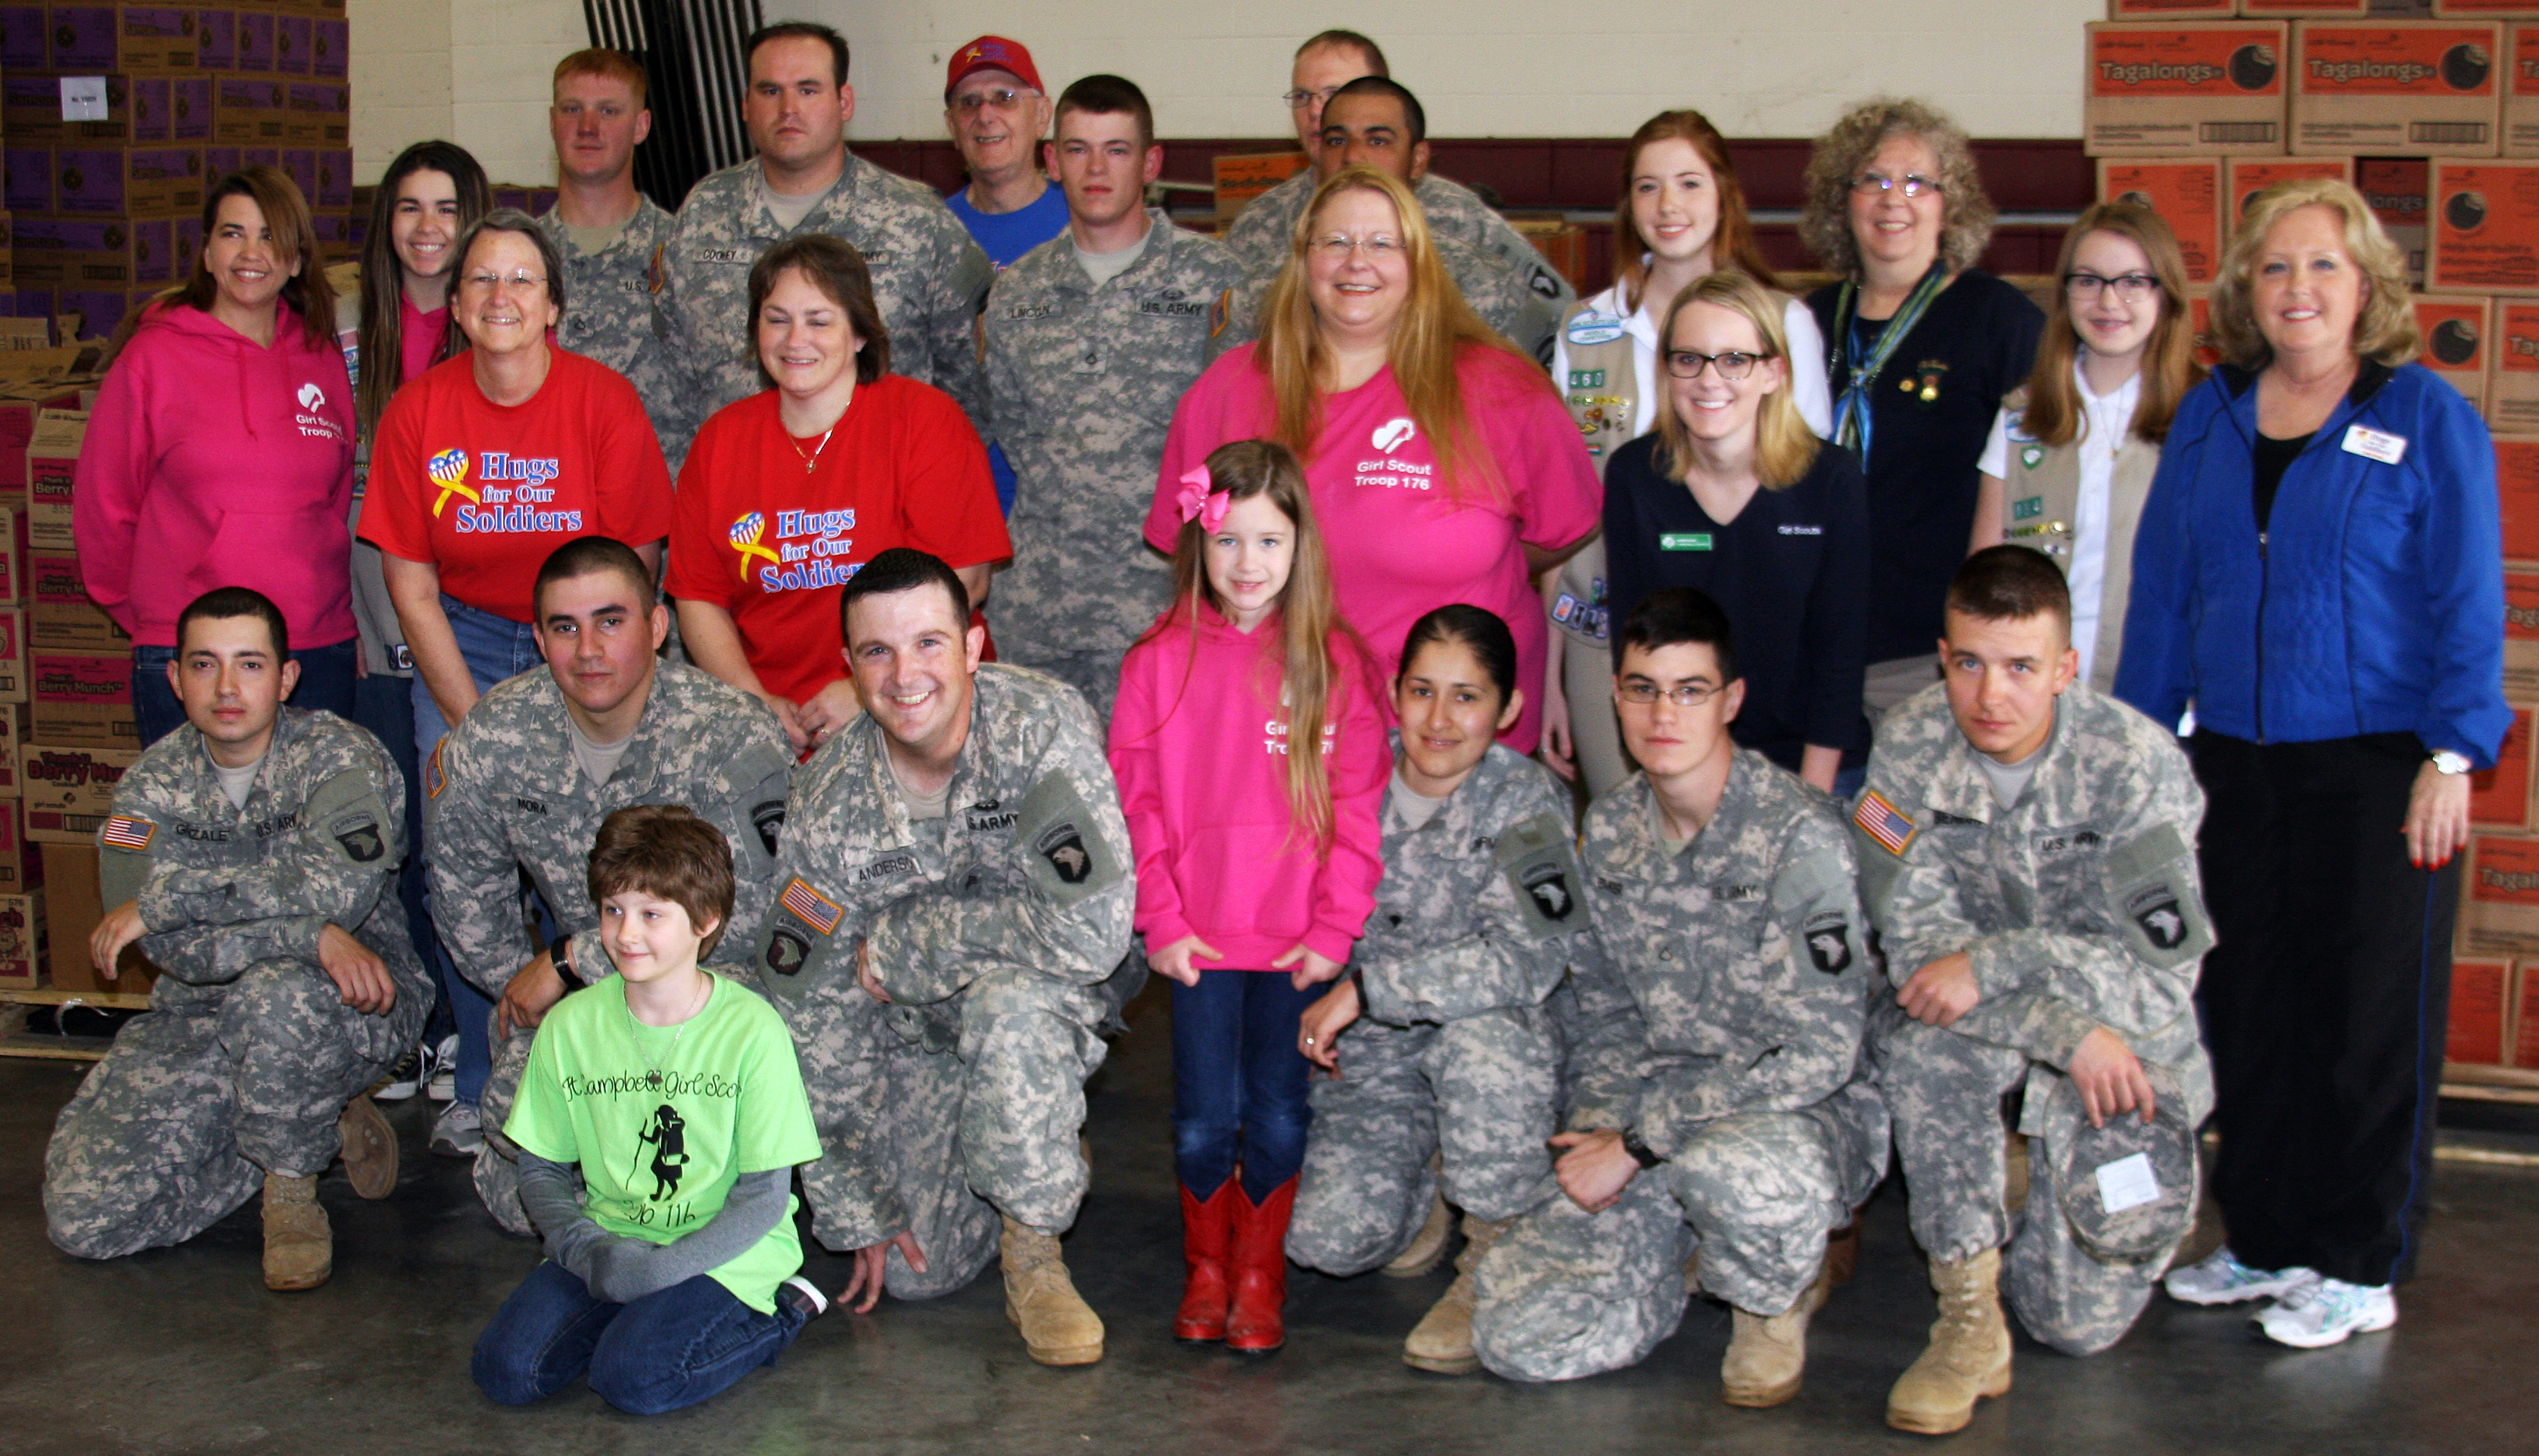 M&W Transportation Supports the Girl Scouts and the Military